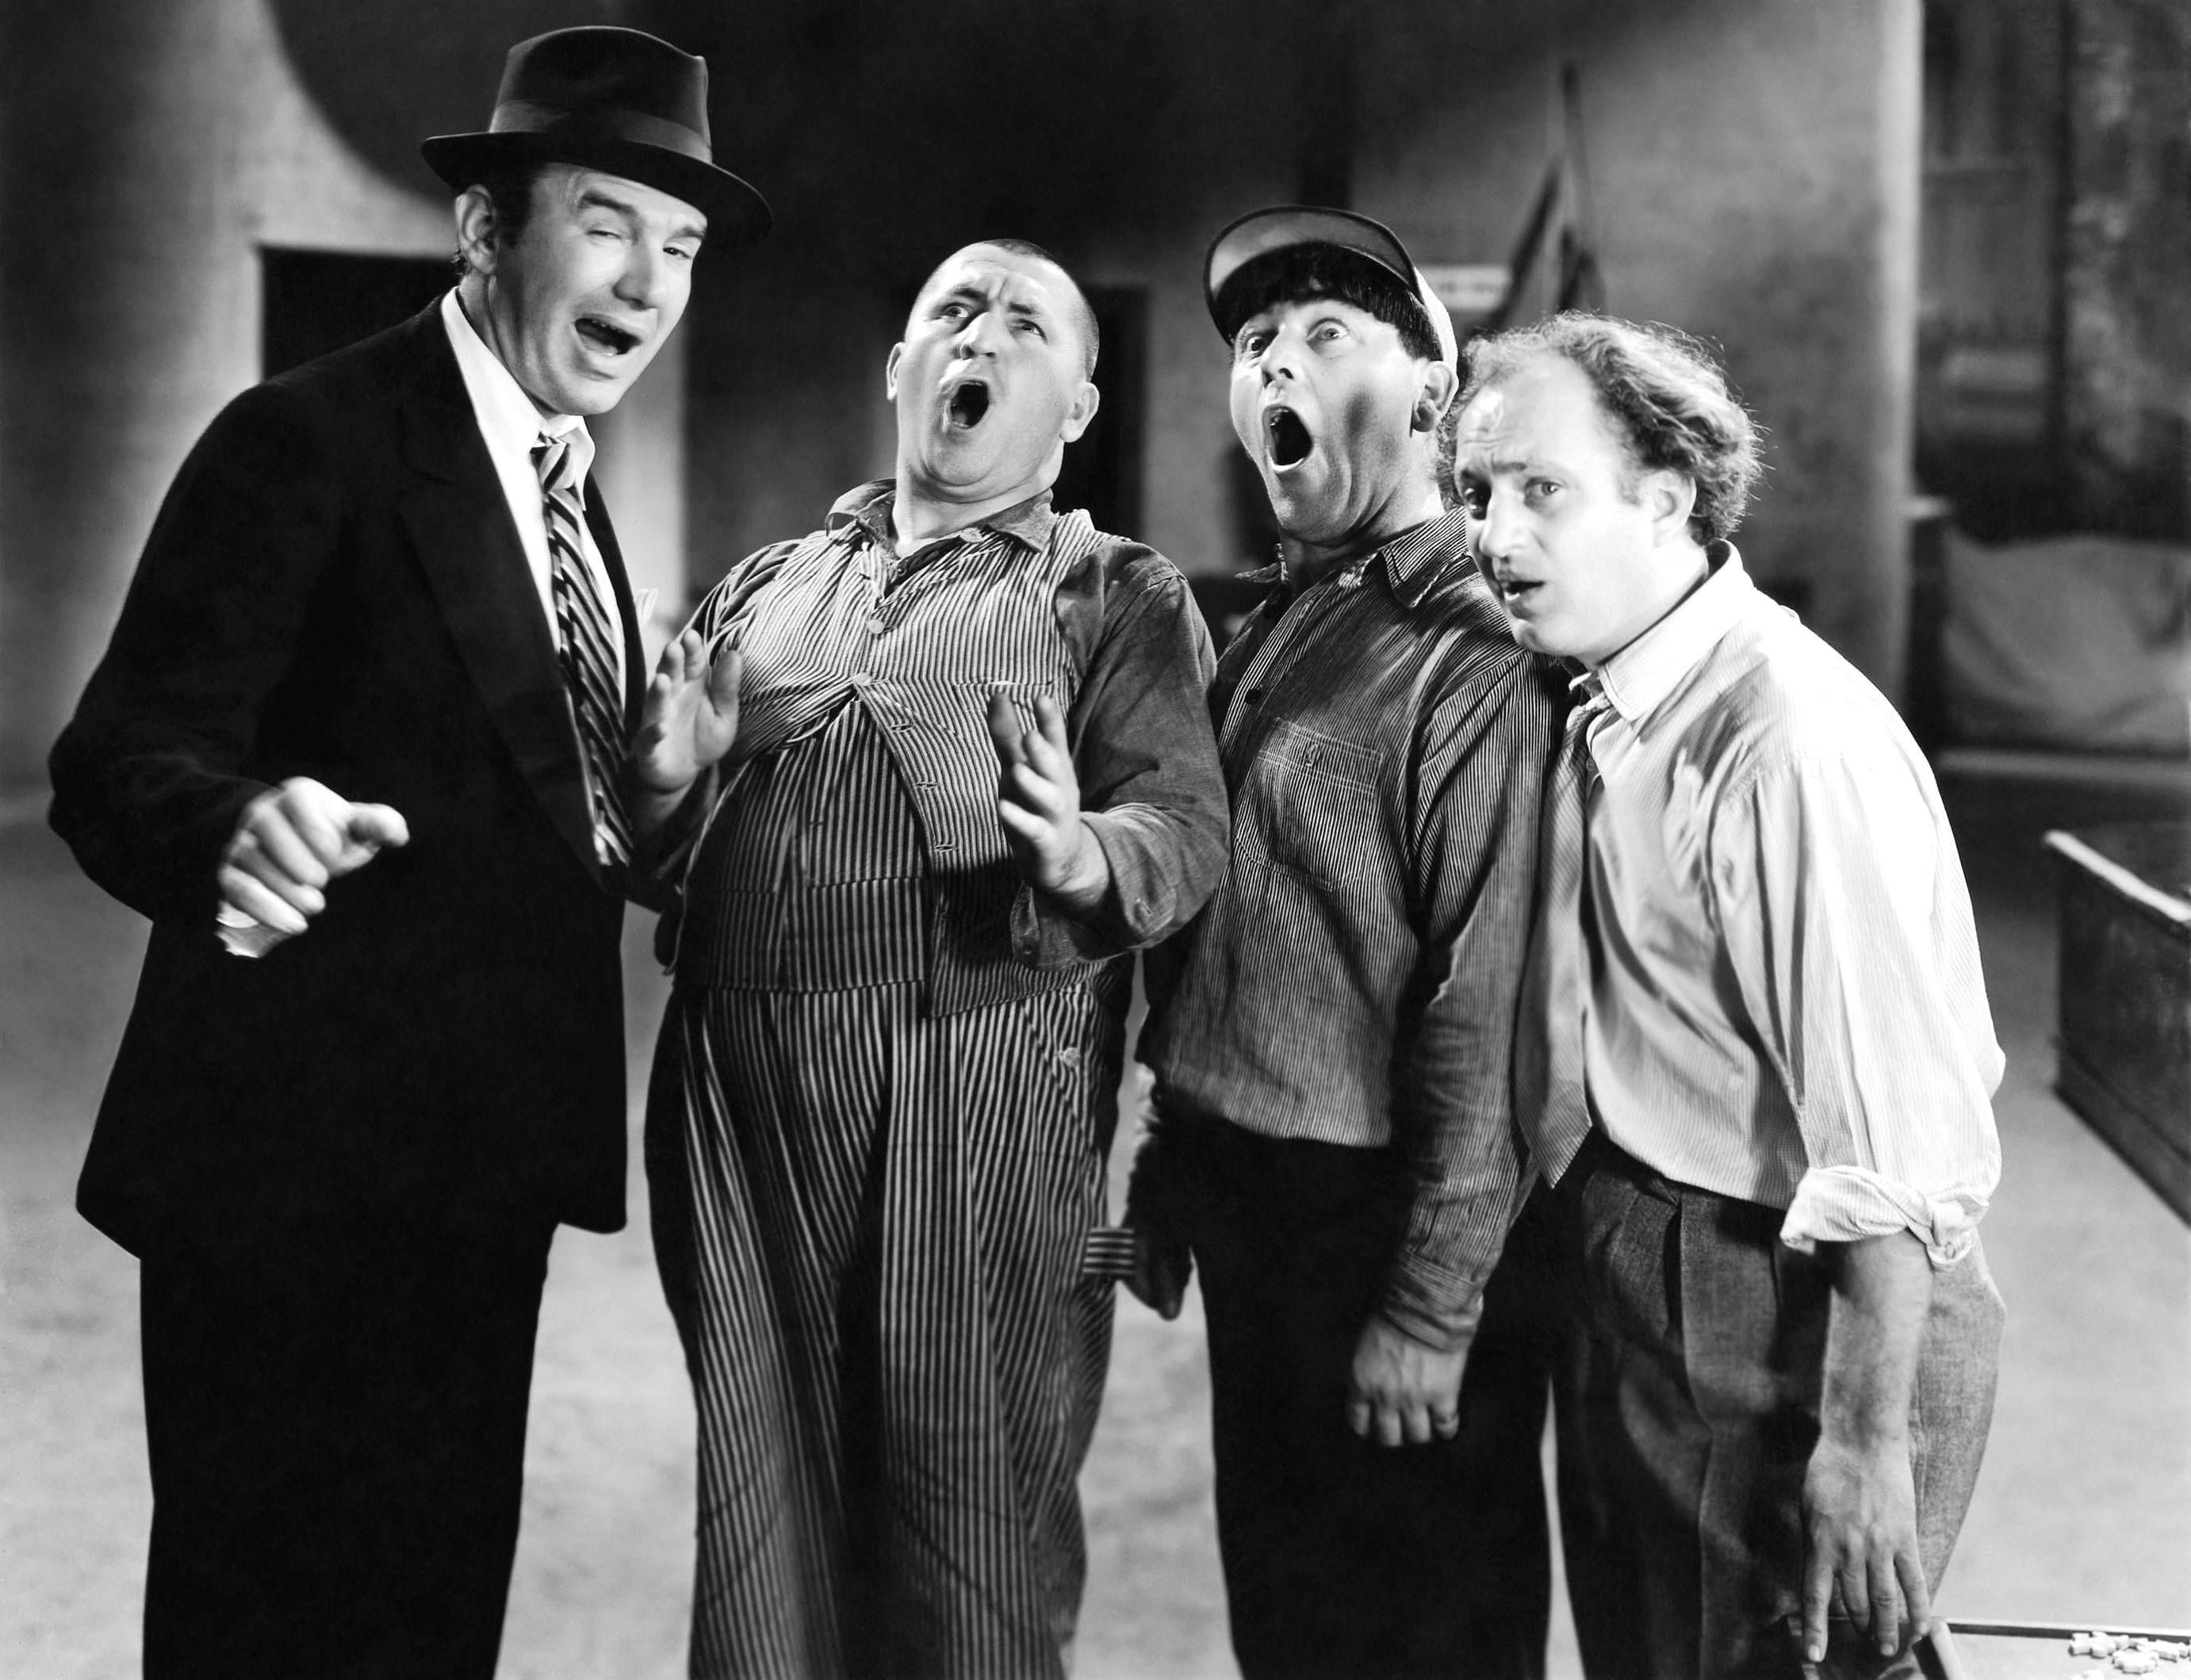 Ted Healy and his Stooges Howard, Moe Howard & Larry Fine